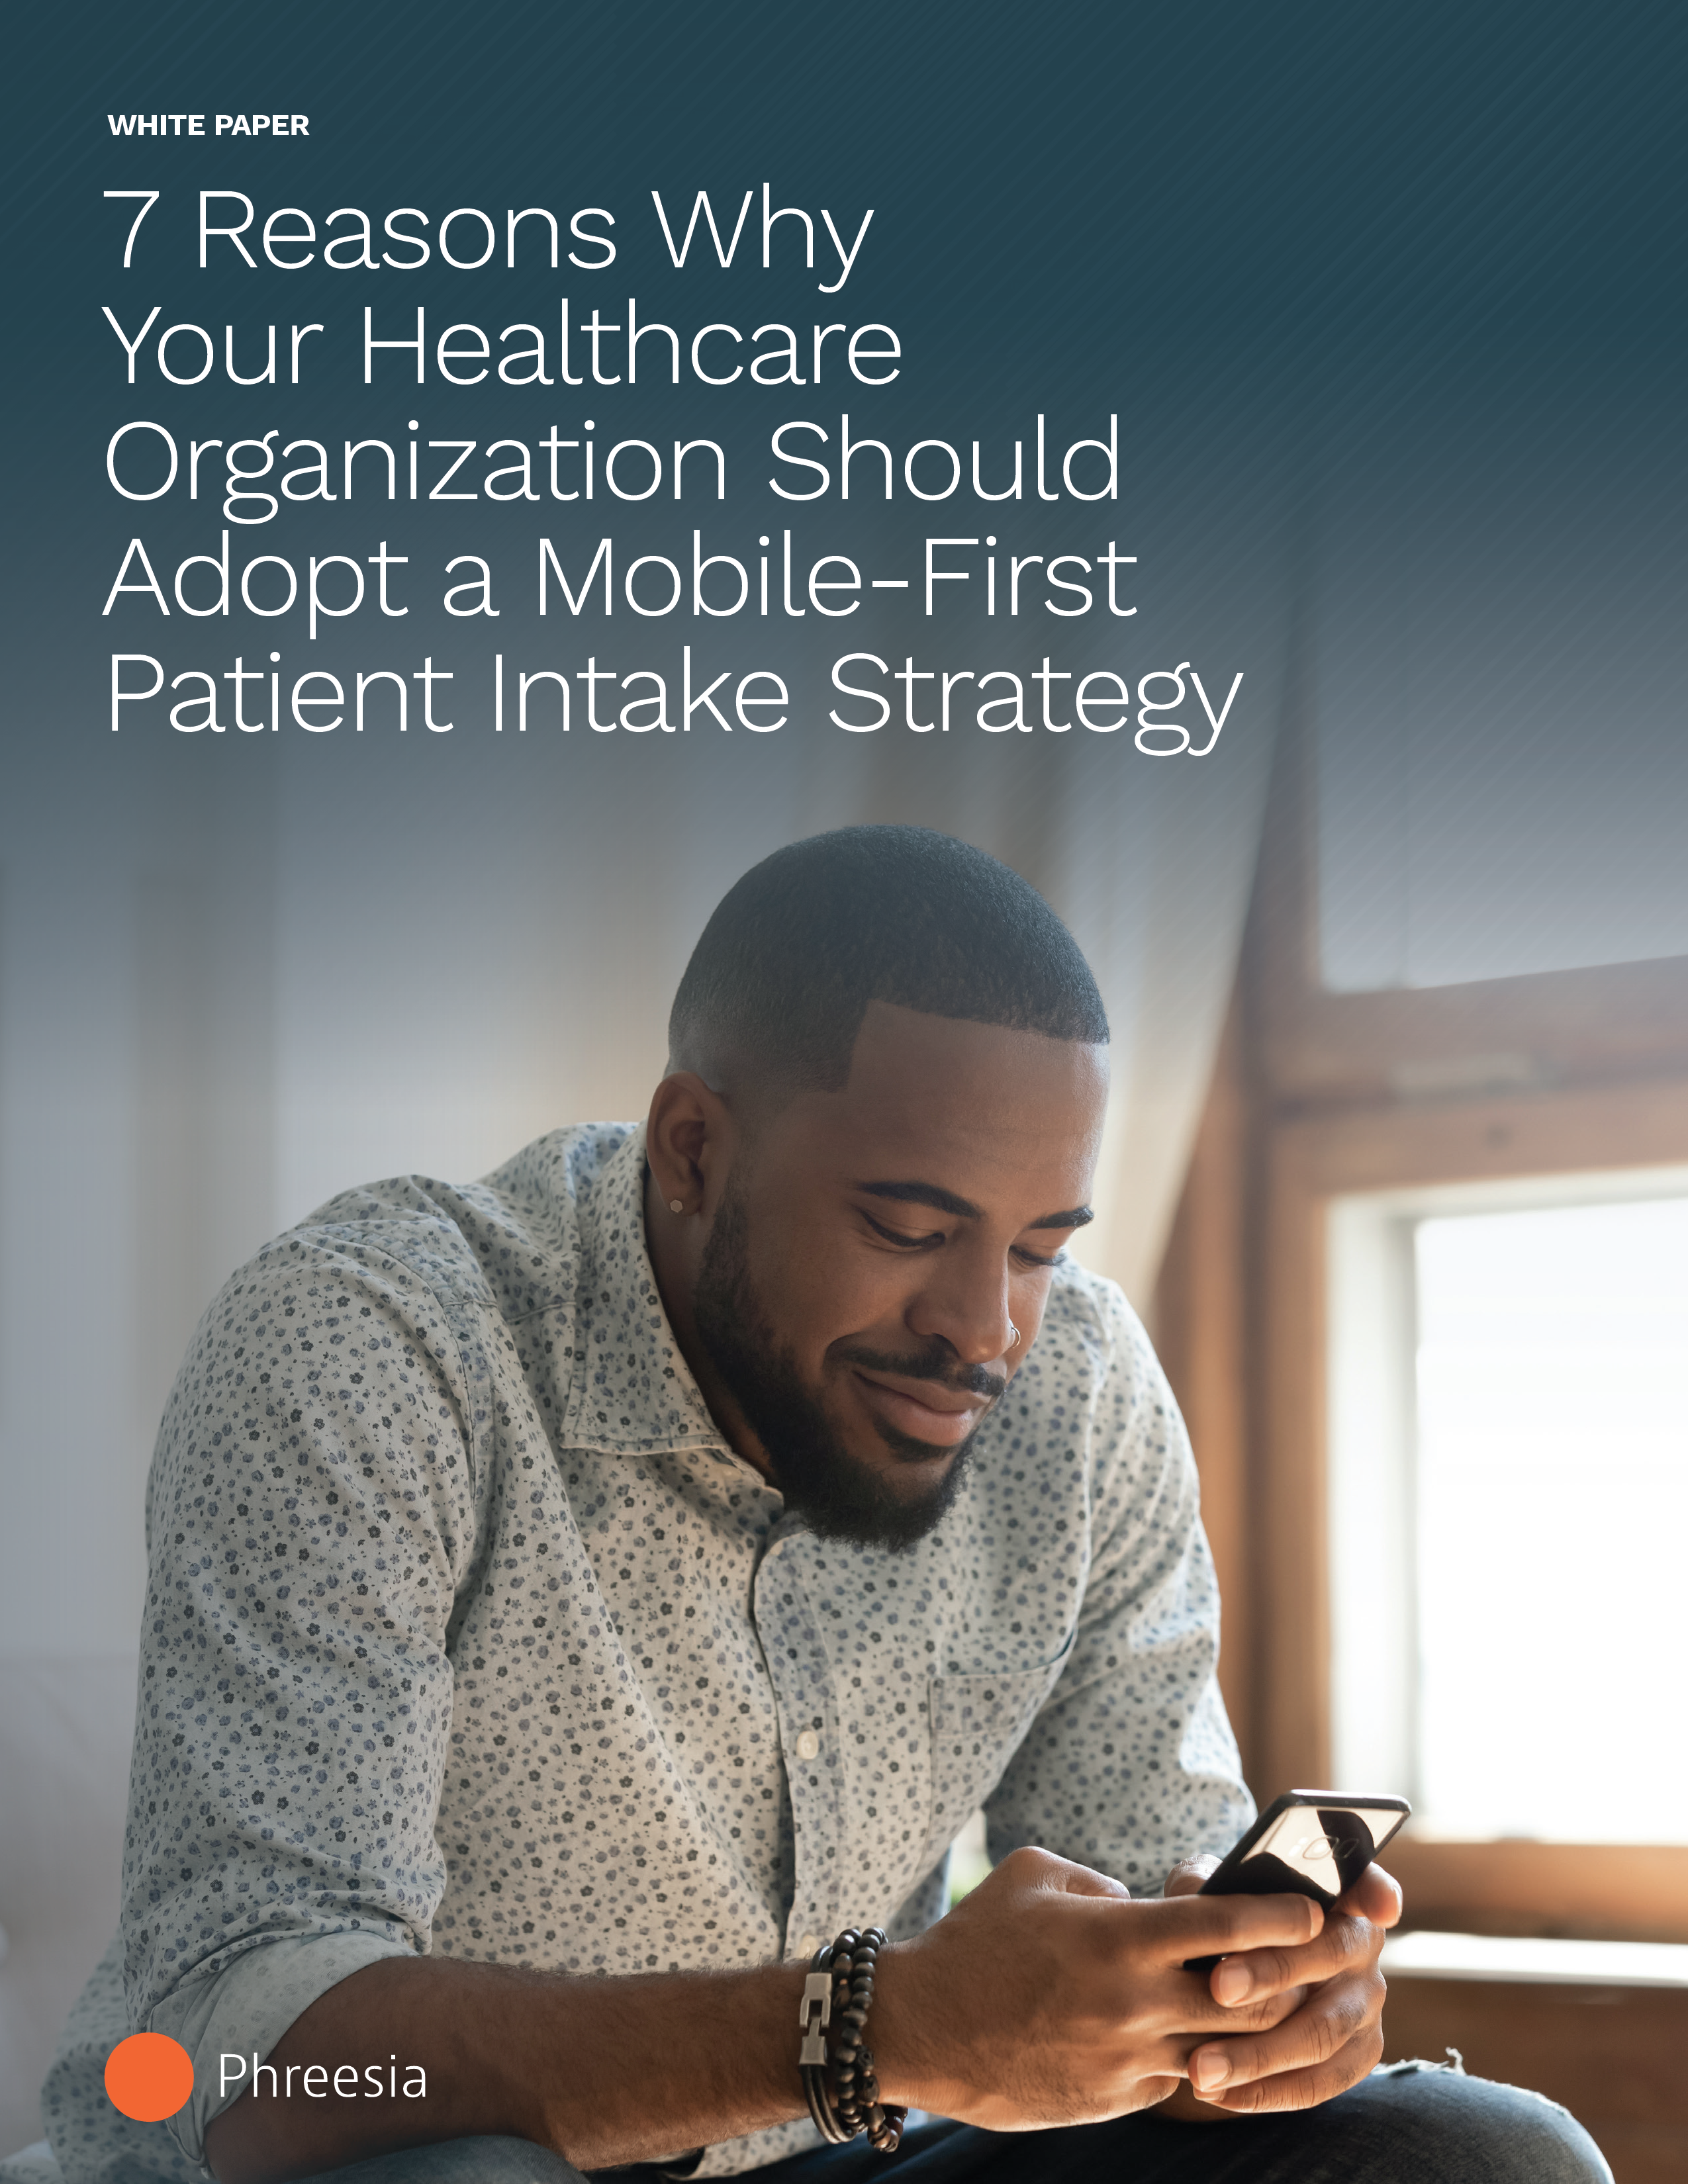 7 Reasons Why Your Healthcare Organization Should Adopt a Mobile-First Patient Intake Strategy